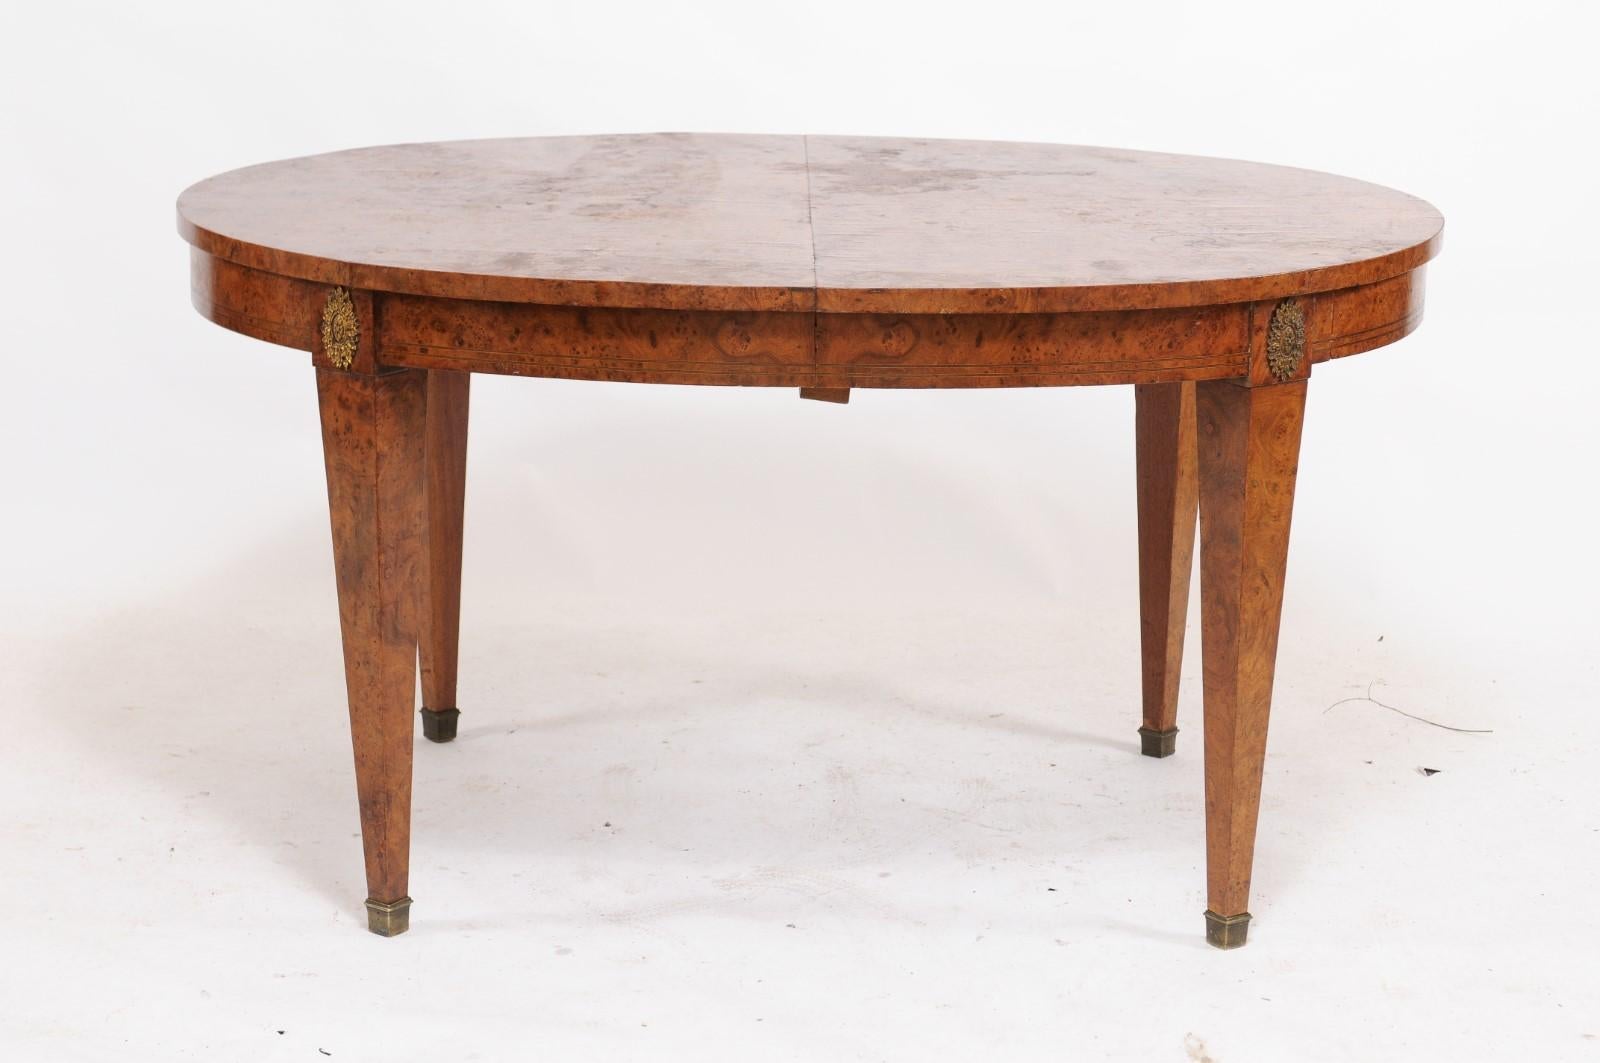 Why we love it: The burled wood patina, pretty cabochon legs, eye-catching oval shape and simple lines make this a charming, one-of-a-kind piece.